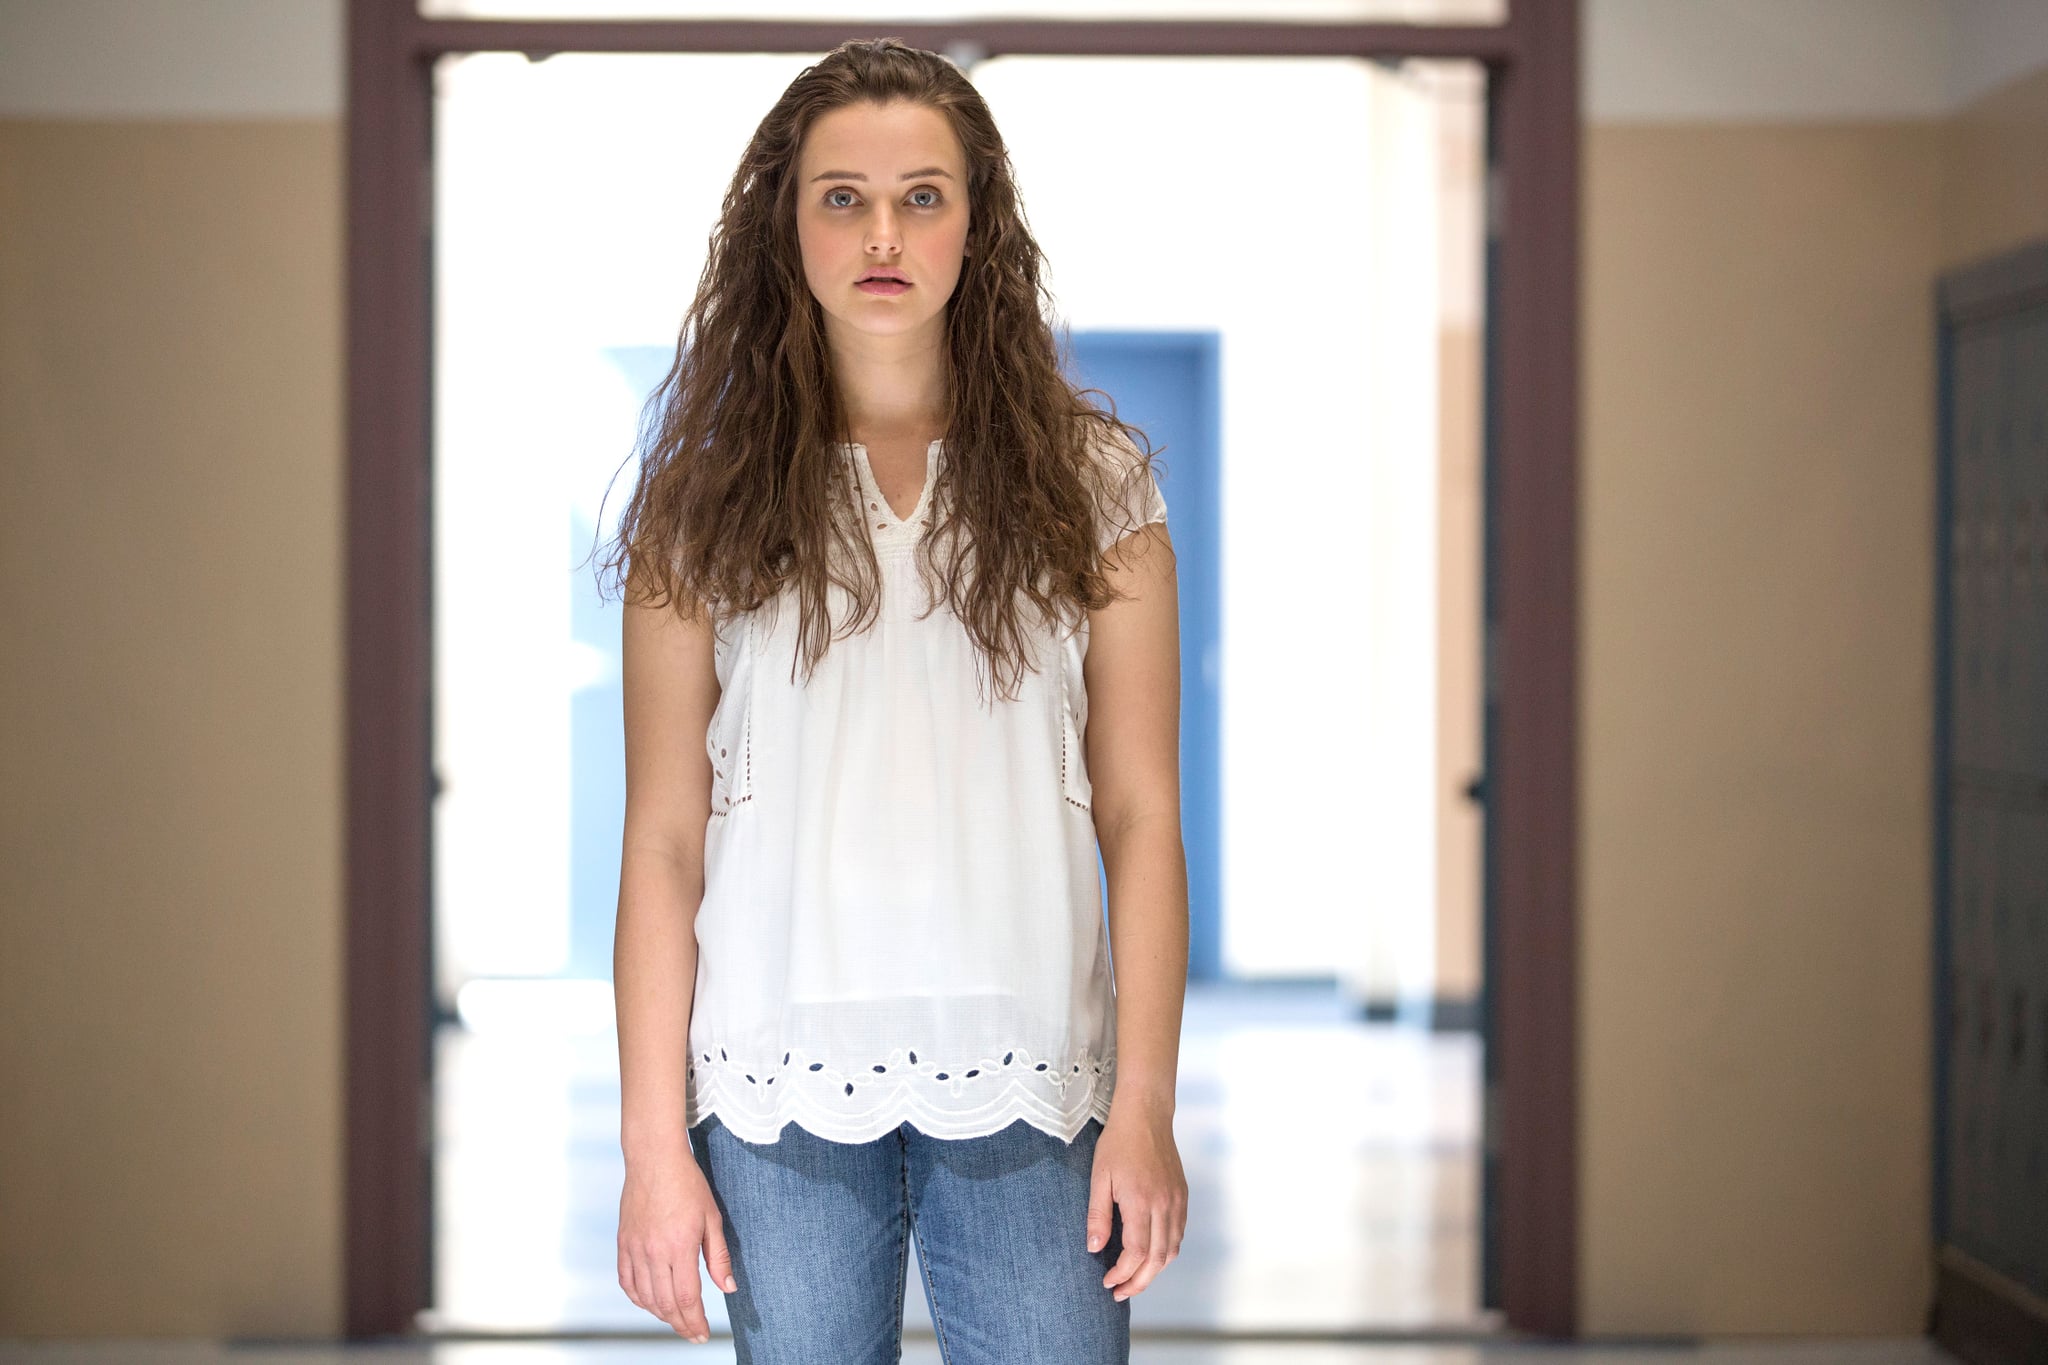 13 REASONS WHY (aka THIRTEEN REASONS WHY), Katherine Langford, (Season 1, Episode 101, aired March 31, 2017), ph: Beth Dubber / Netflix / courtesy Everett Collection